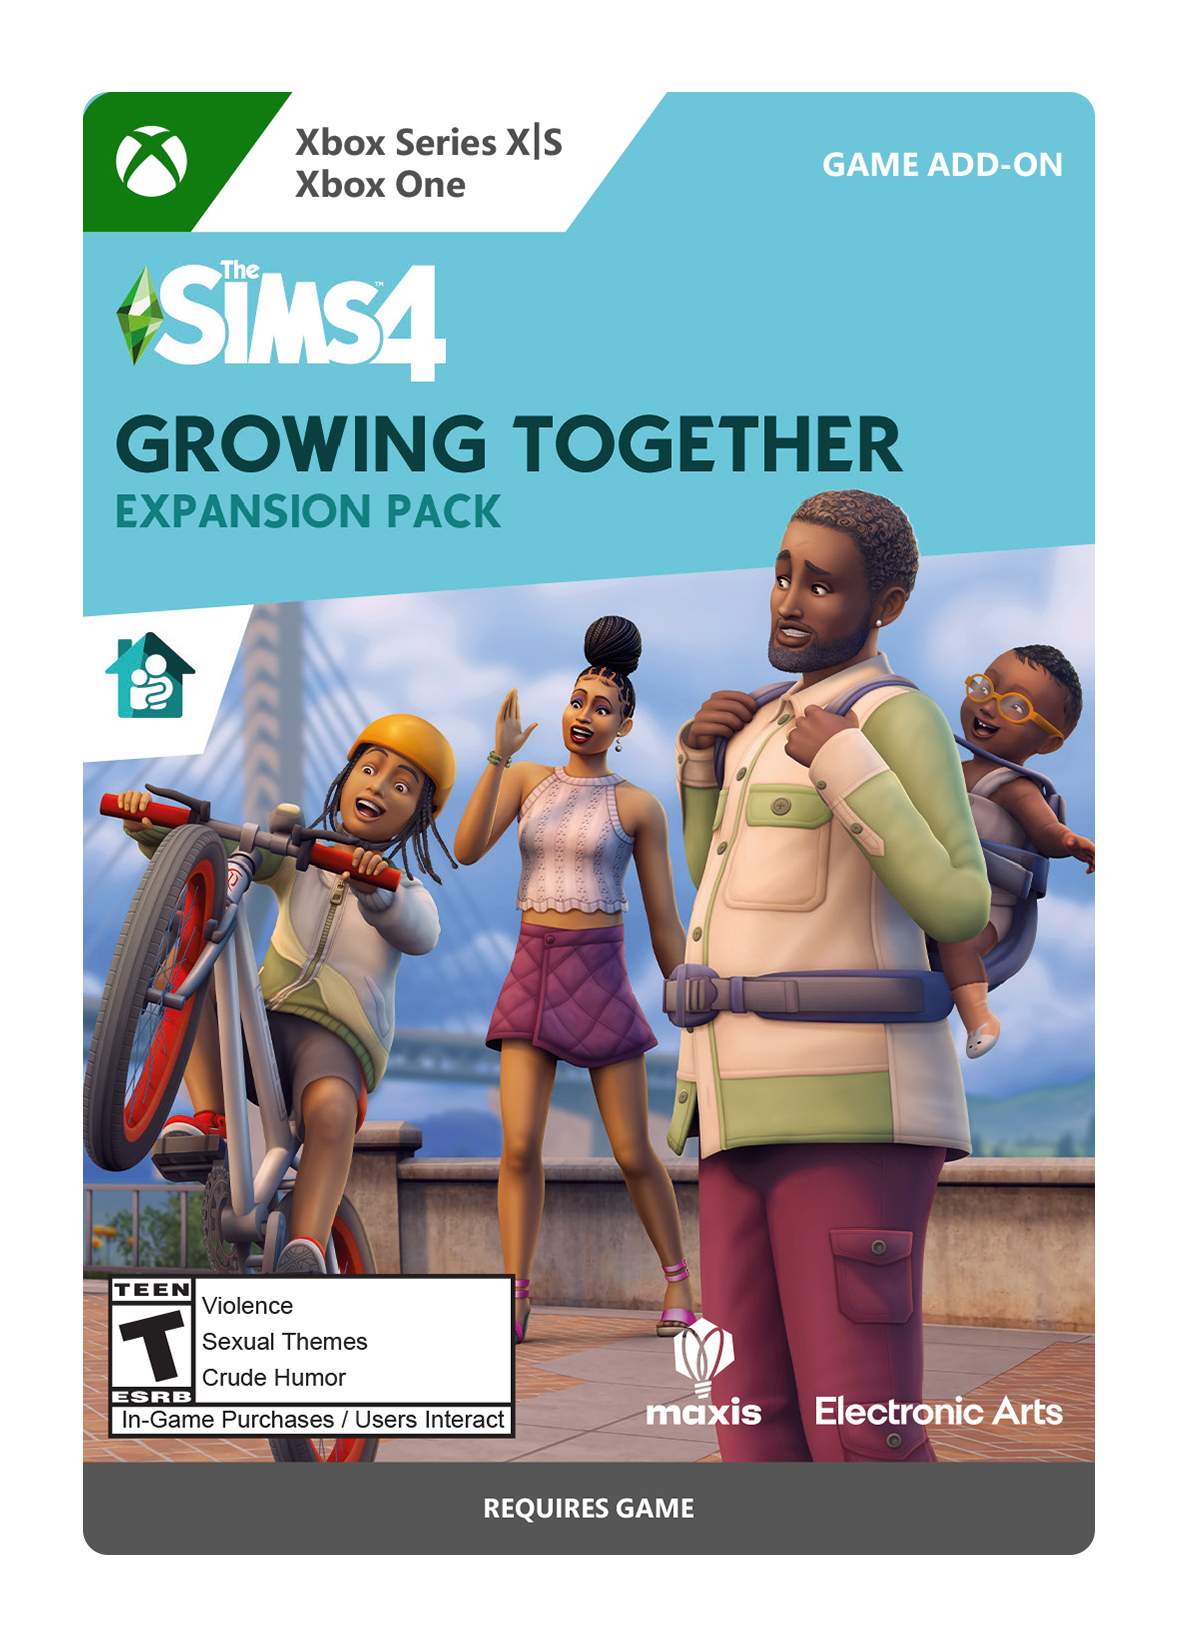 The Sims 4: Growing Together Expansion Pack DLC - Xbox Series X/S, Xbox One